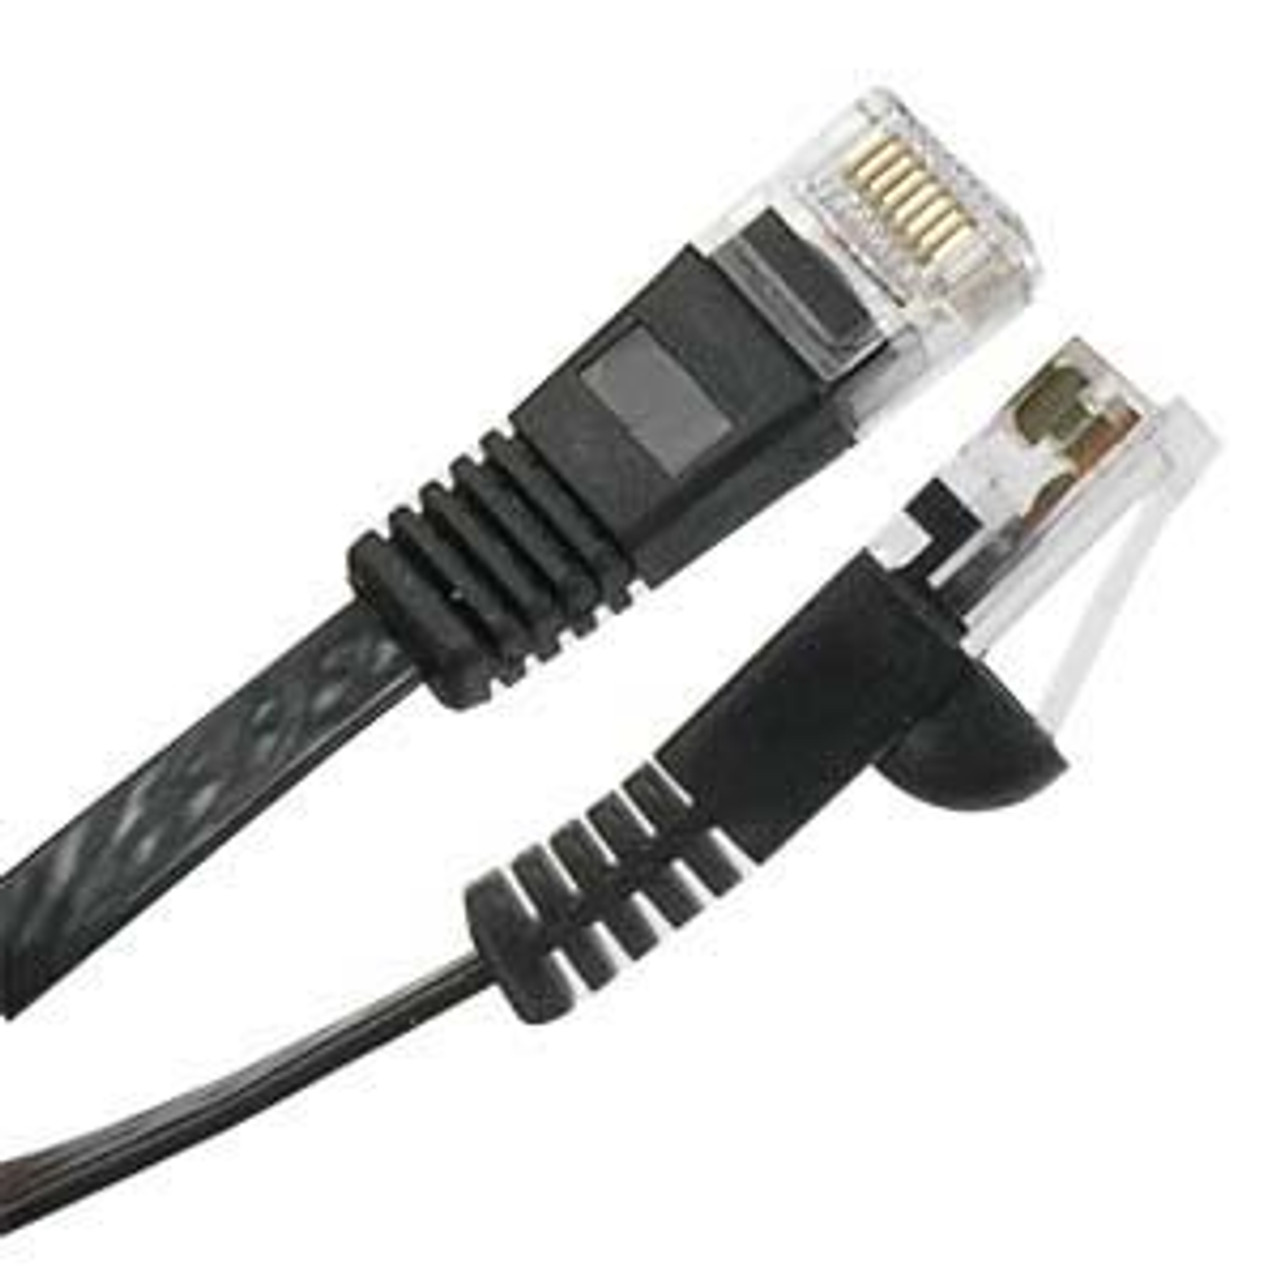 CAT6 Flat Ethernet Cable RJ45 Lan Cable Networking Ethernet